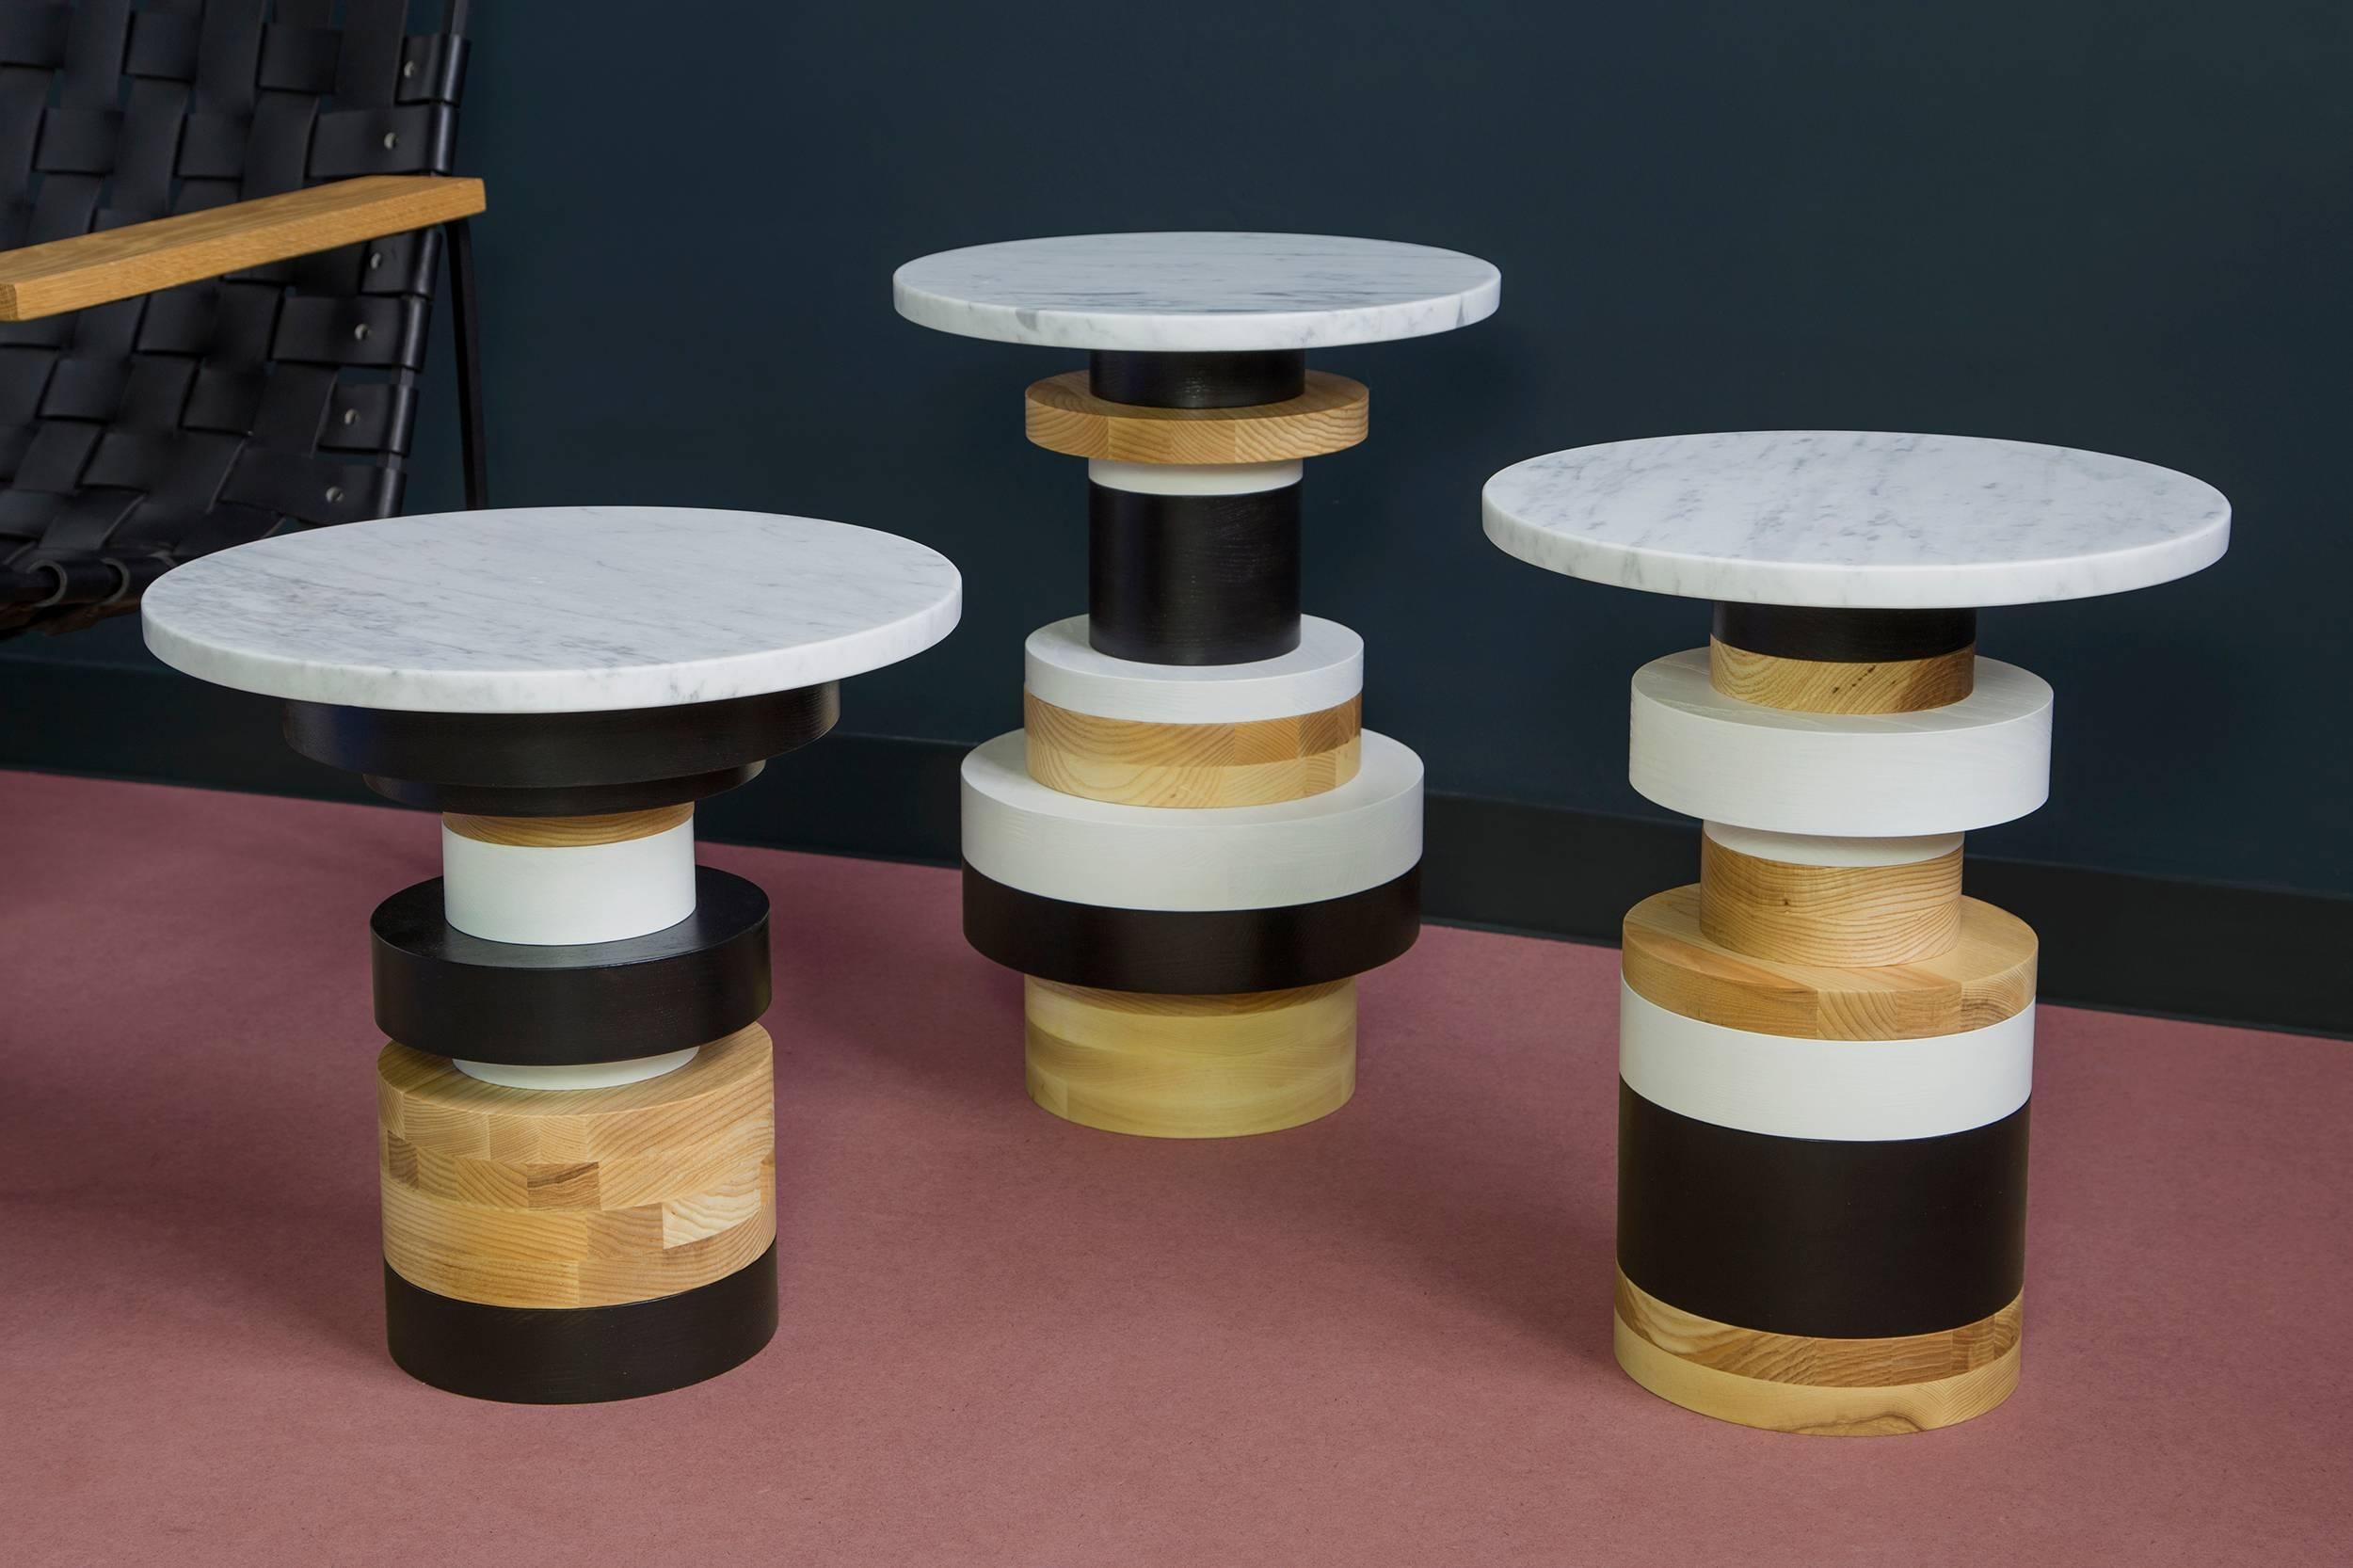 The Sottsass-inspired “Sass Tables” are simple, sculptural accents for any interior space. Made from stacked wooden bases and a honed marble-top, Sass tables are perfect individually or clustered. Measure: 20 inches tall with 14 inch marble top.